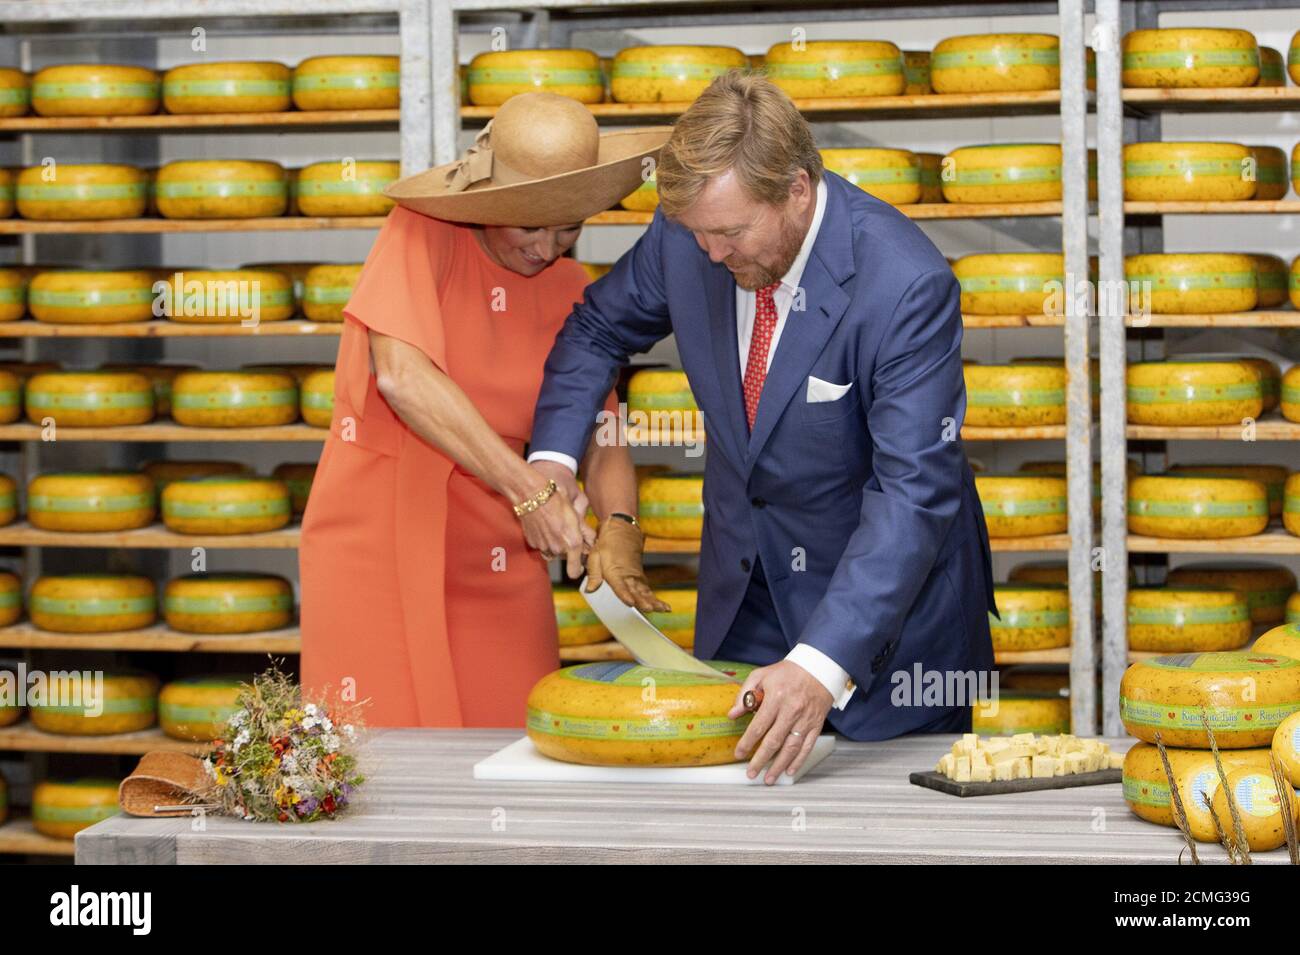 Tijnje, Netherlands. 17th Sep, 2020. King Willem-Alexander and Queen Maxima of The Netherlands at Kaasboerderij De Deelen in Tijnje, on September 17, 2020, this sustainable cheese farm is located in the De Deelen nature reserve, for a a regional visit to Southeast Friesland, the visit is about sustainability, the future of agriculture and the Fryske language and cultureCredit: Albert Nieboer/ Netherlands OUT/Point De Vue Out |/dpa/Alamy Live News Stock Photo